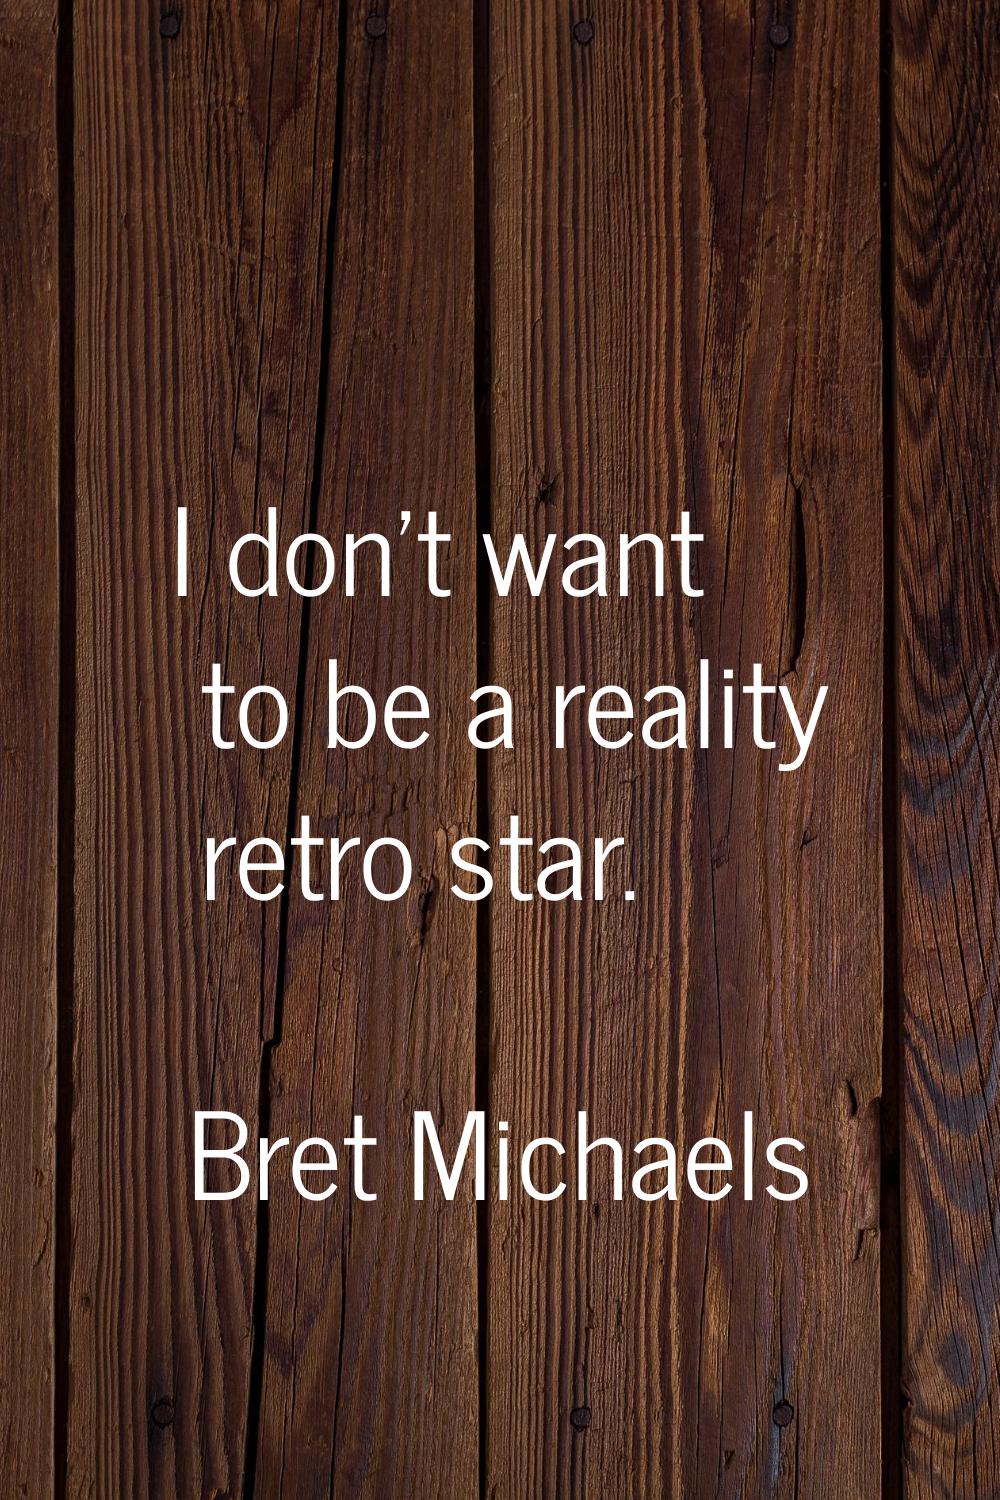 I don't want to be a reality retro star.